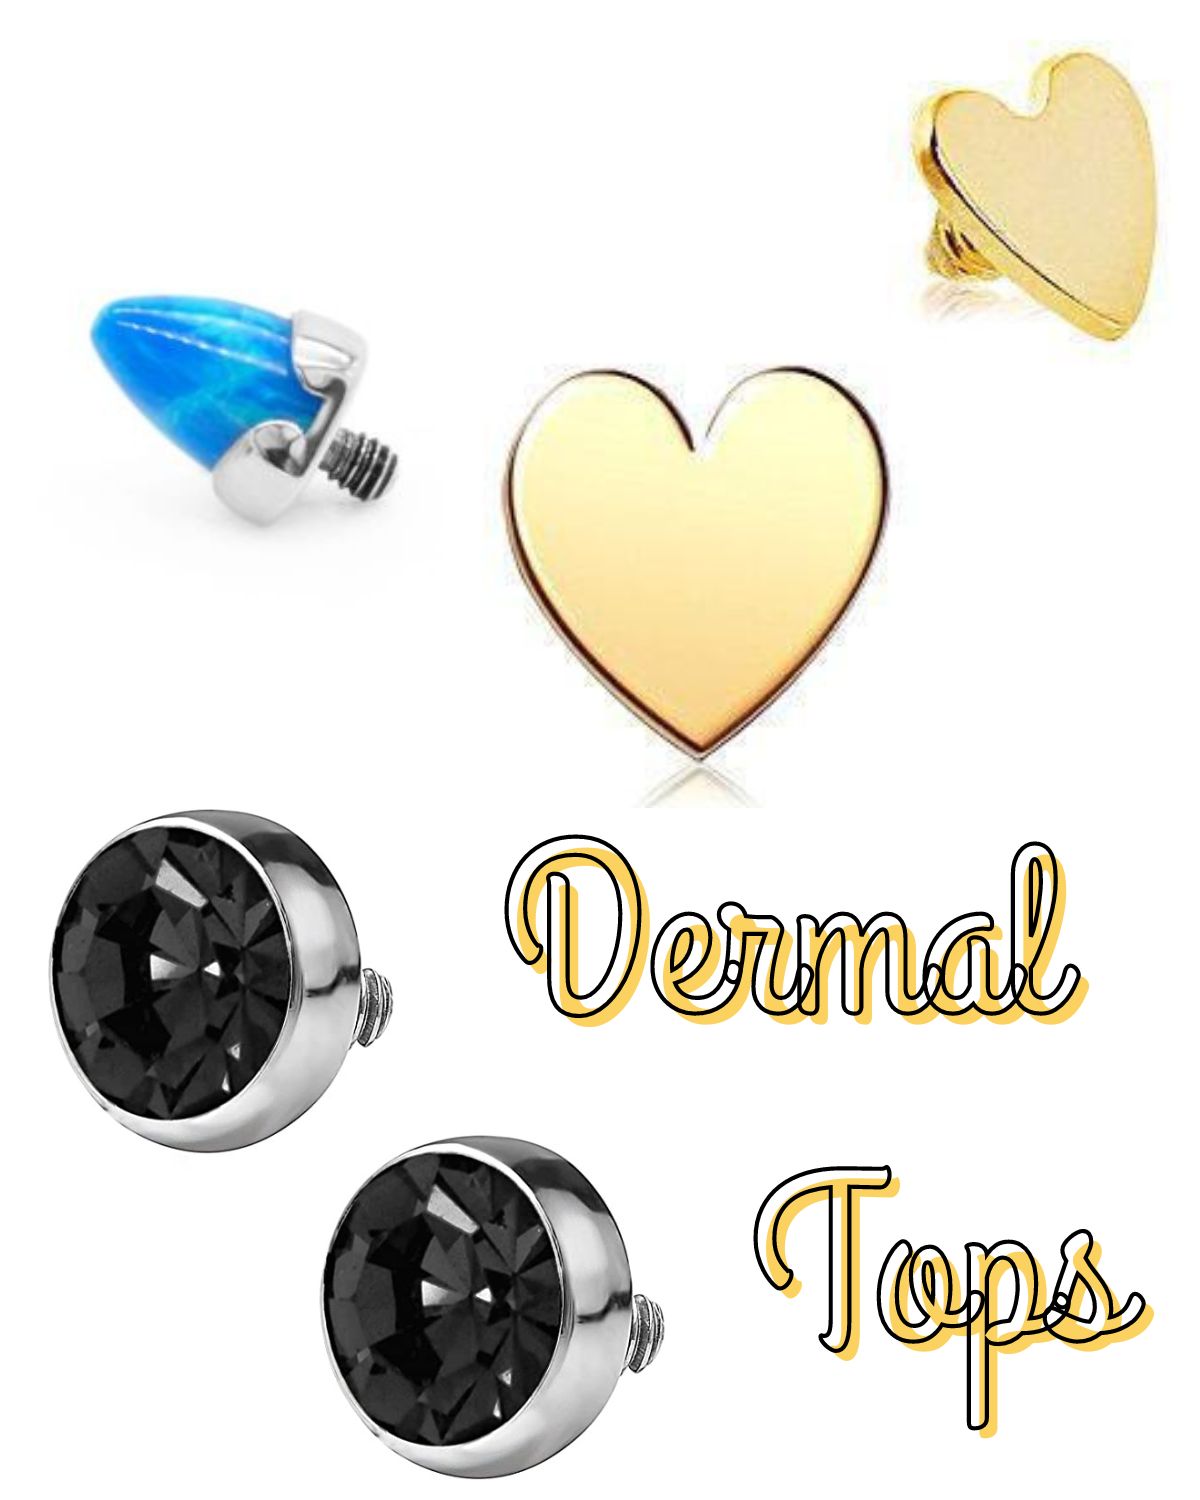 Different tops of dermal jewelry